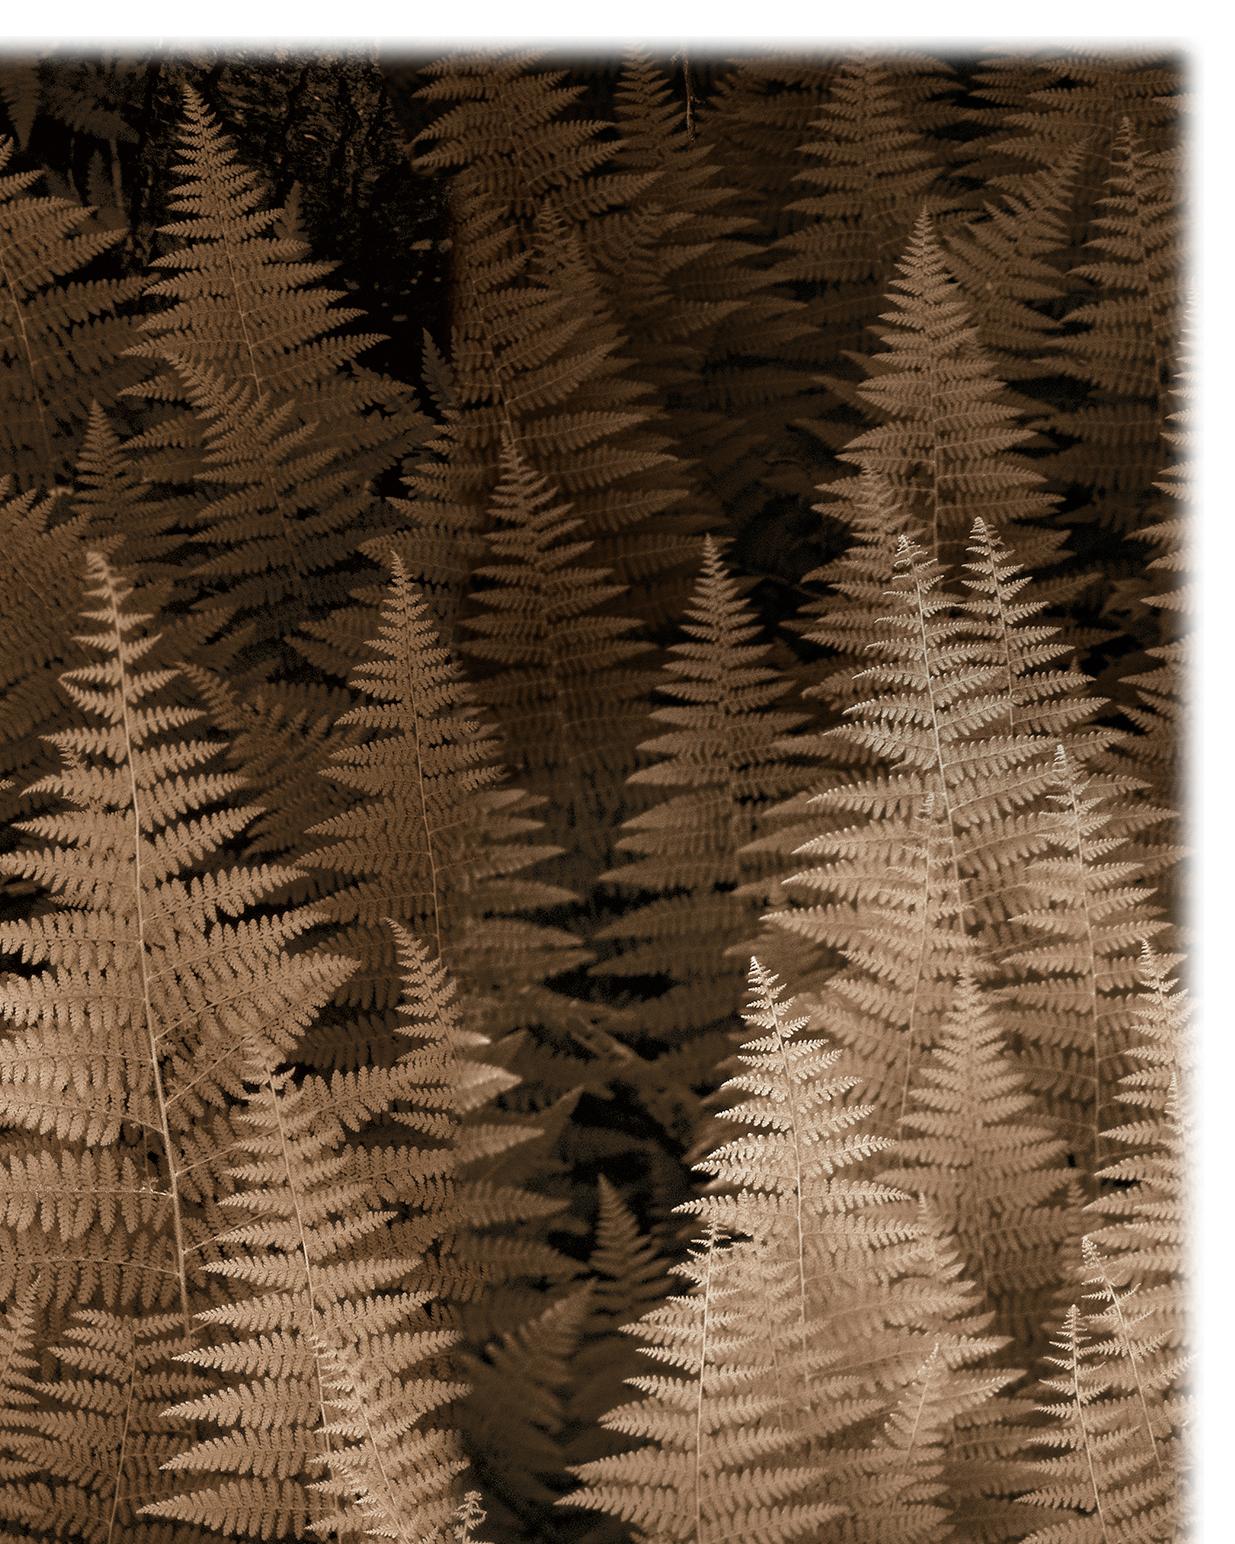 Ferns No. 2 (Sepia-Tone Botanical Still-Life Photograph on Watercolor Paper) For Sale 3